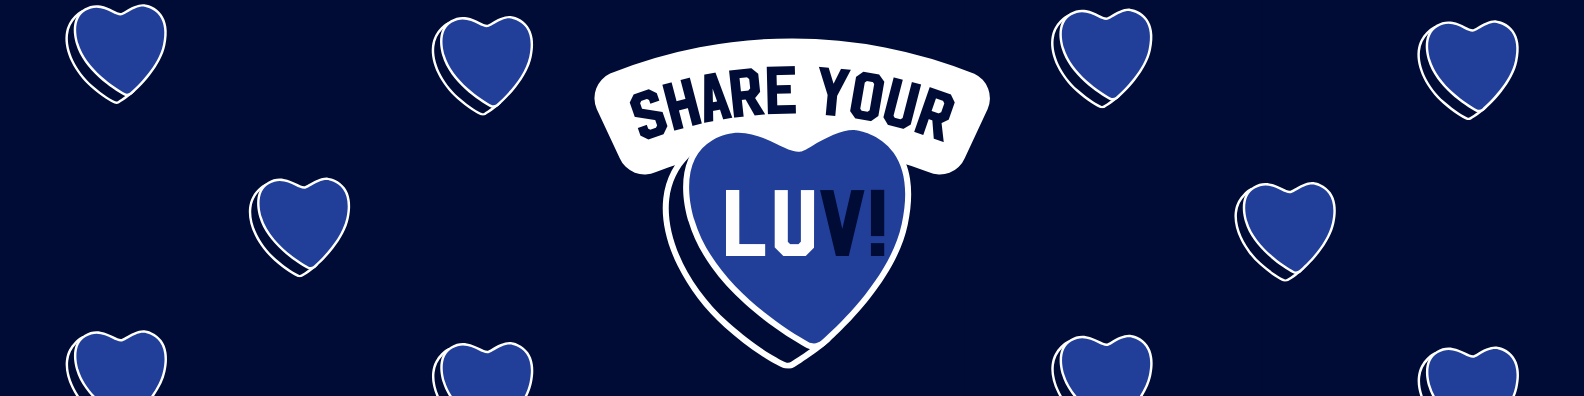 Share your LUv